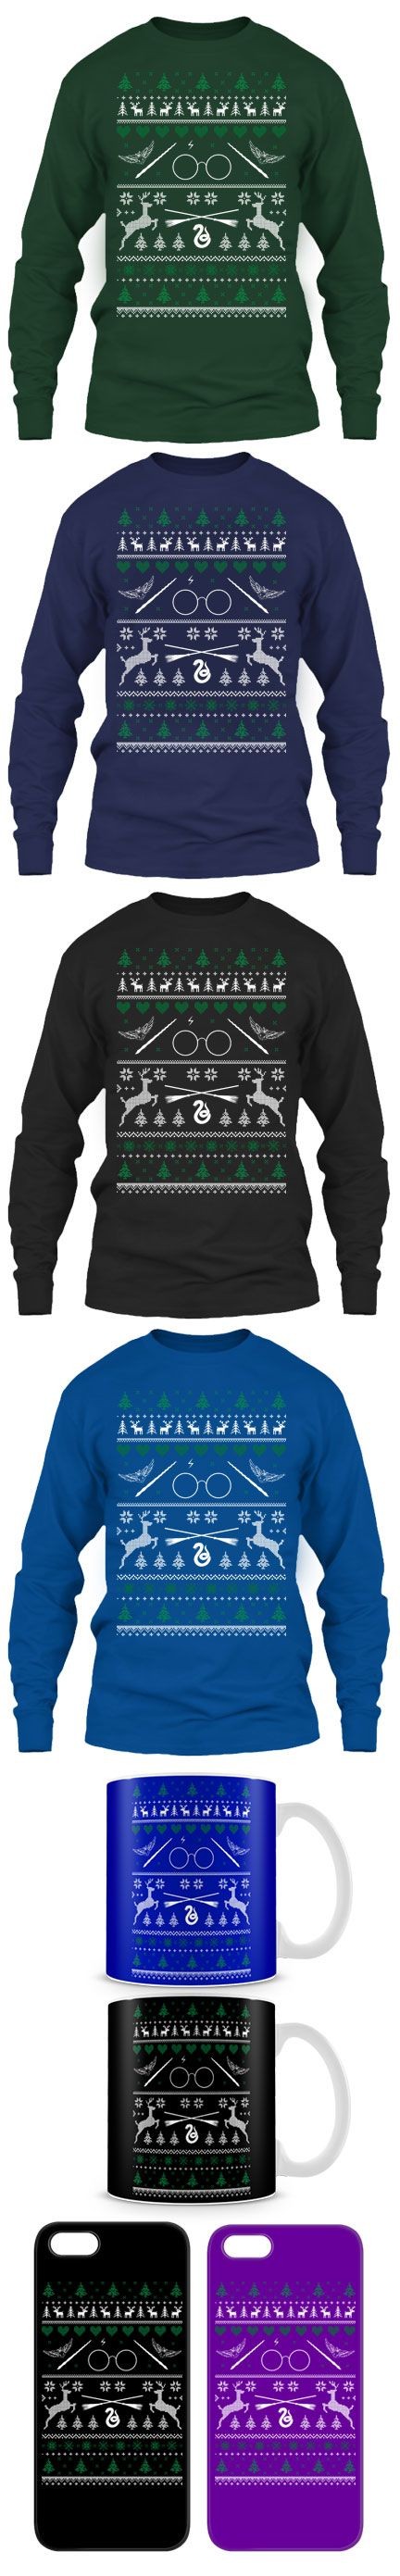 For Harry Potter Fans Ugly Christmas Sweater! Clic...